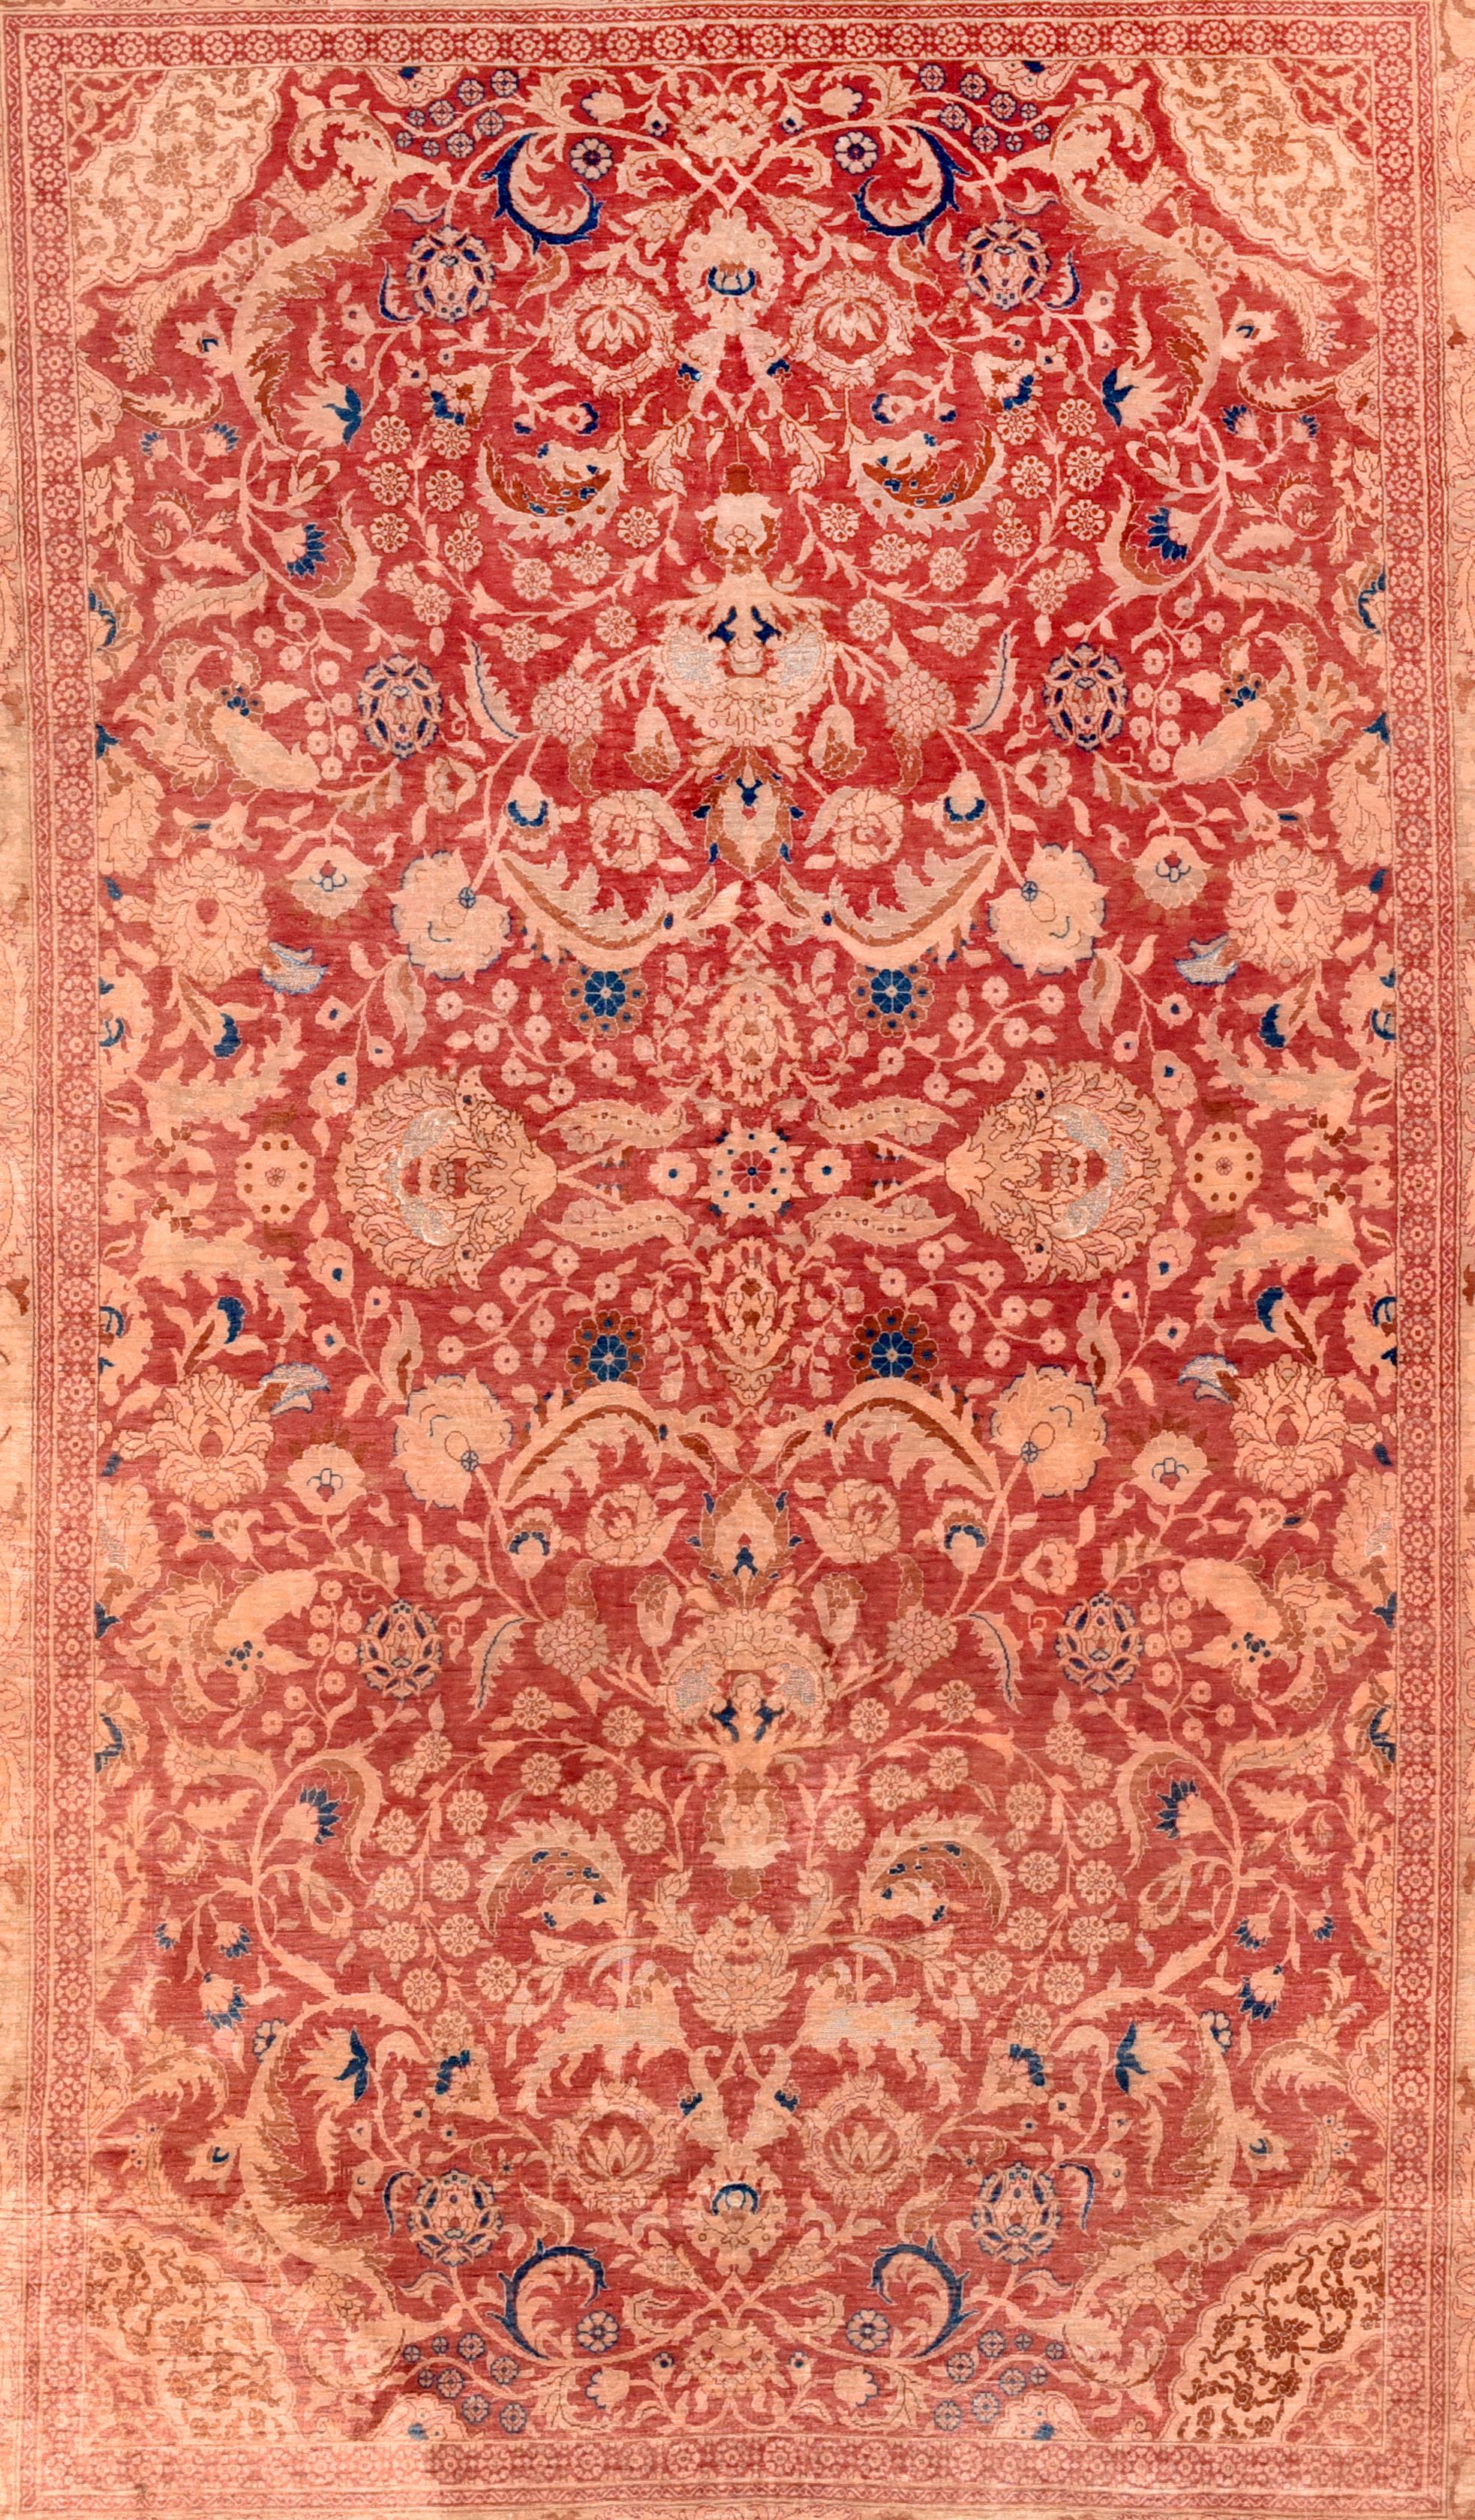 Hereke carpets used to be only produced in Hereke, a coastal town in Turkey, 60 km from Istanbul. The materials used are silk, a combination of wool and cotton and sometimes gold or silver threads[1].

The Ottoman sultan, Abdülmecid I founded the